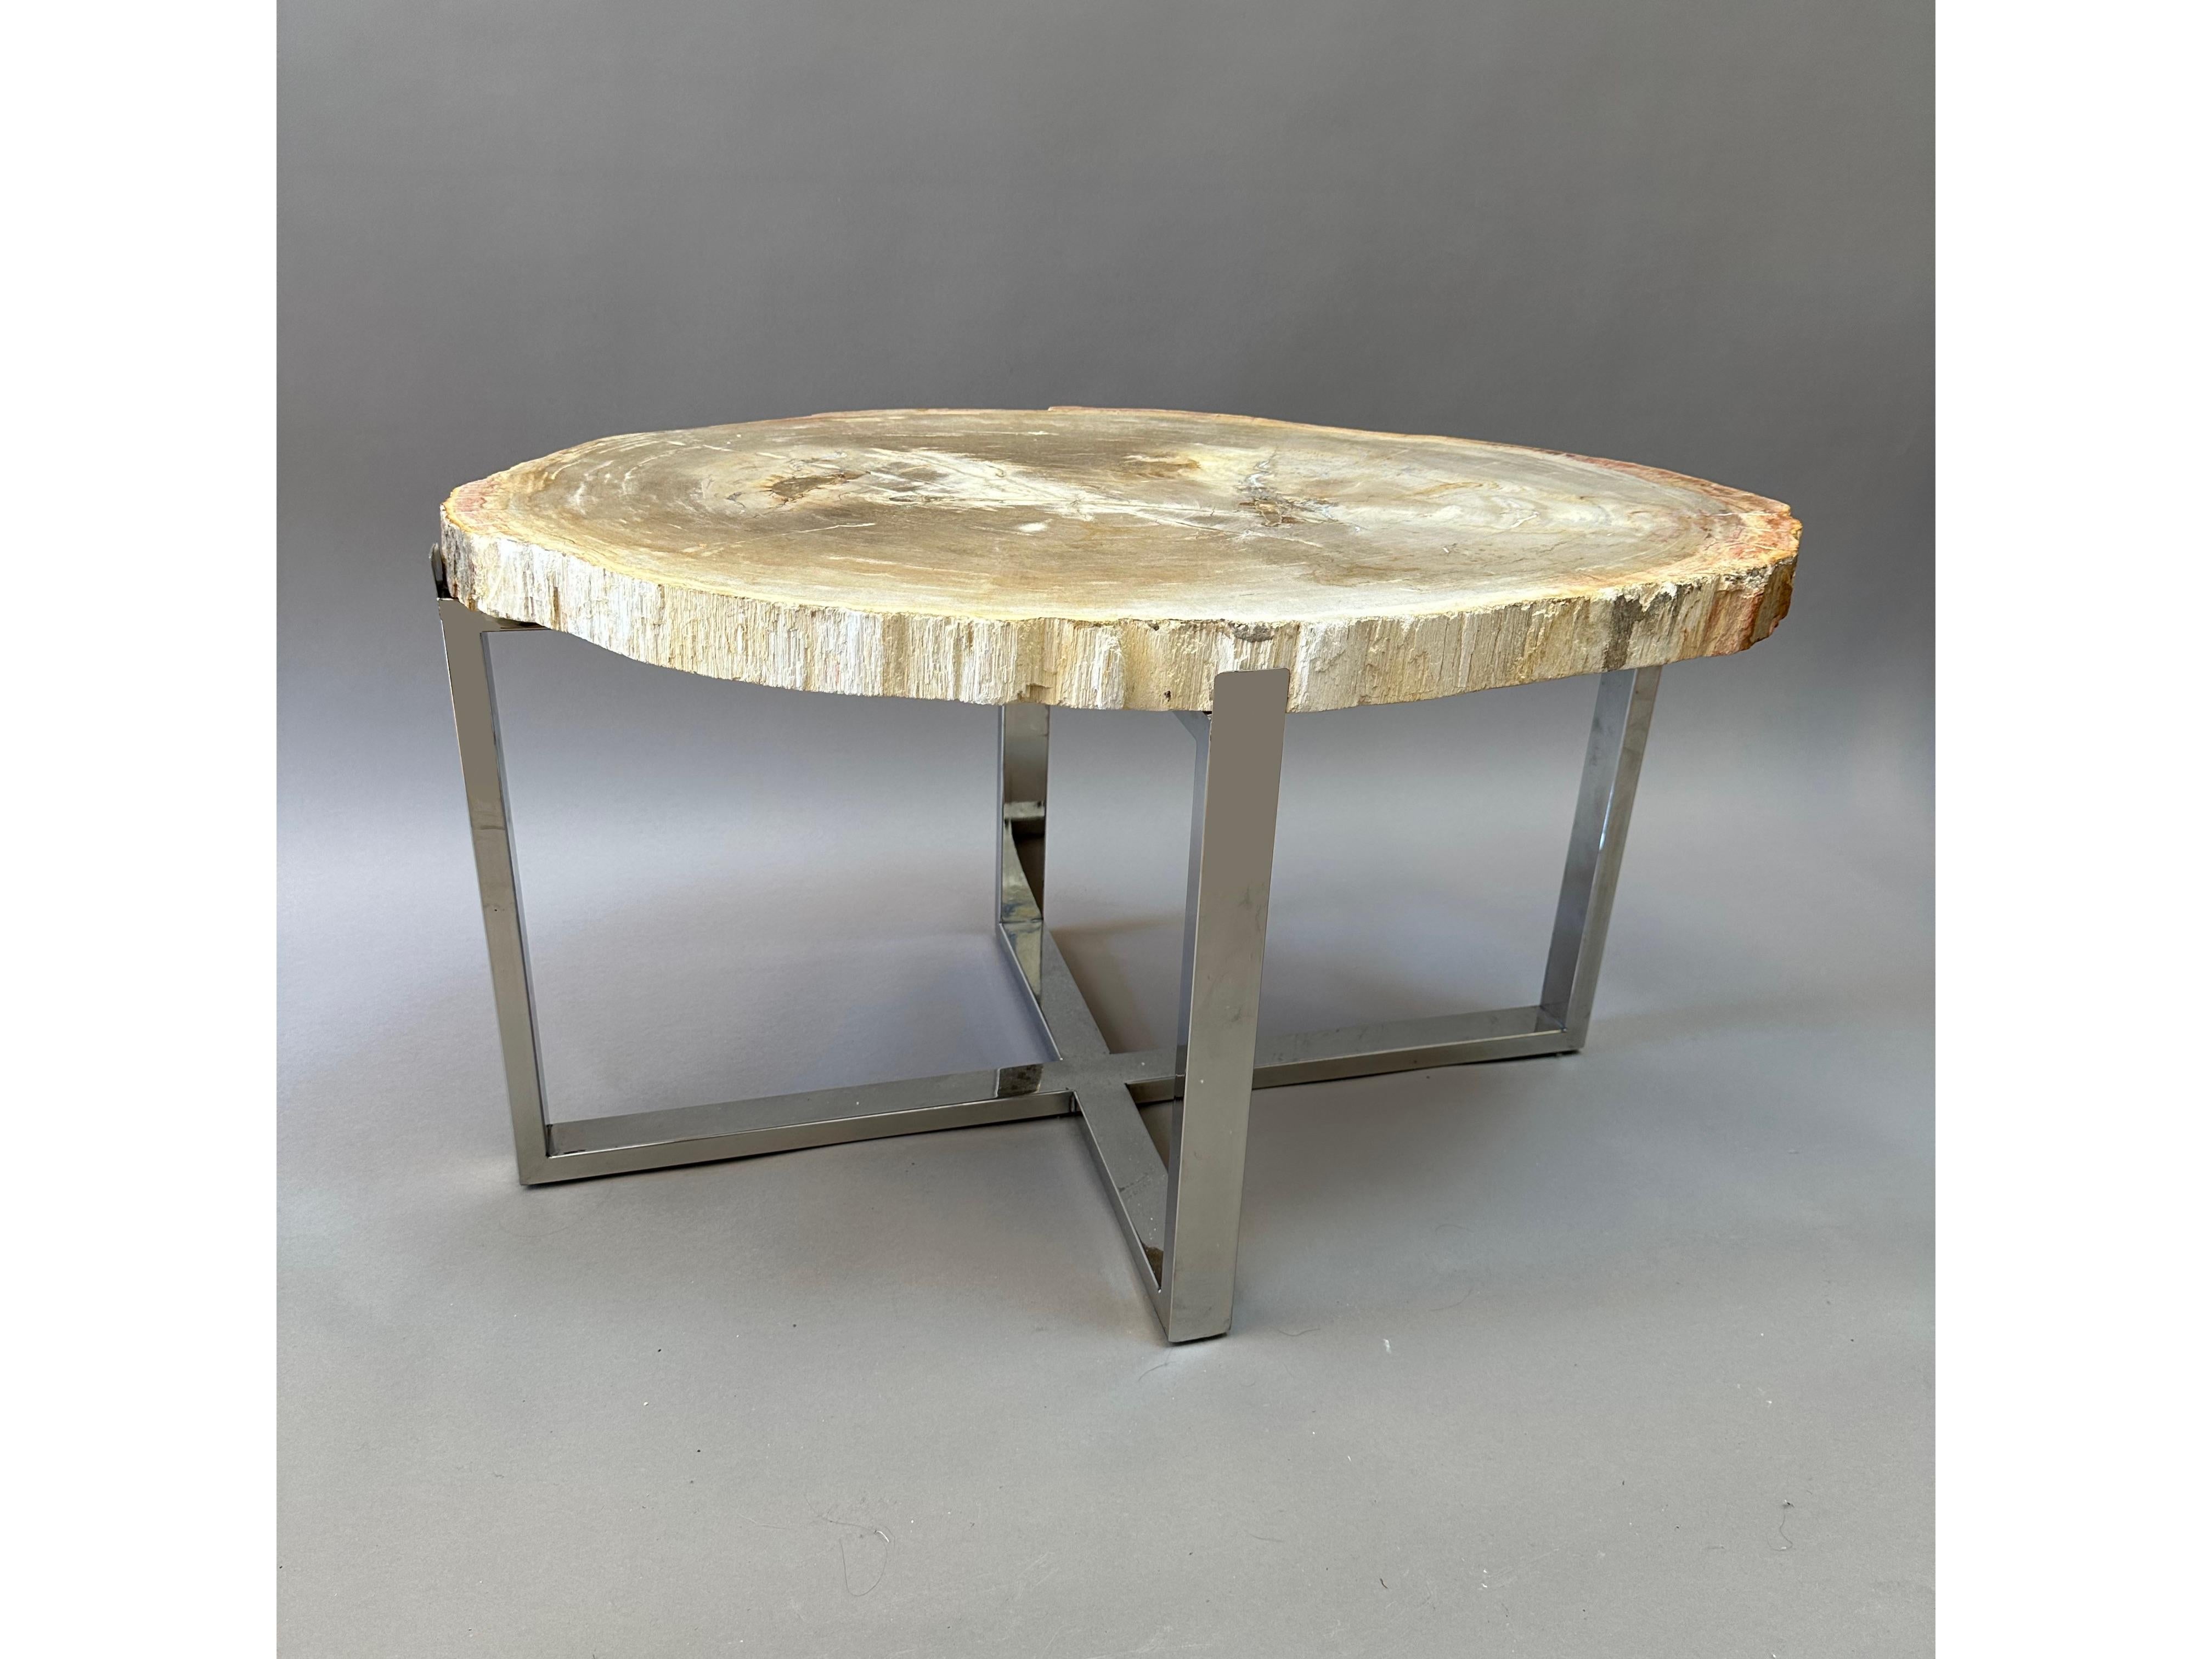 Unusual Modern Side Table with a prehistoric 20-300 Million Year Old Petrified Wood Top. Custom made chrome base.